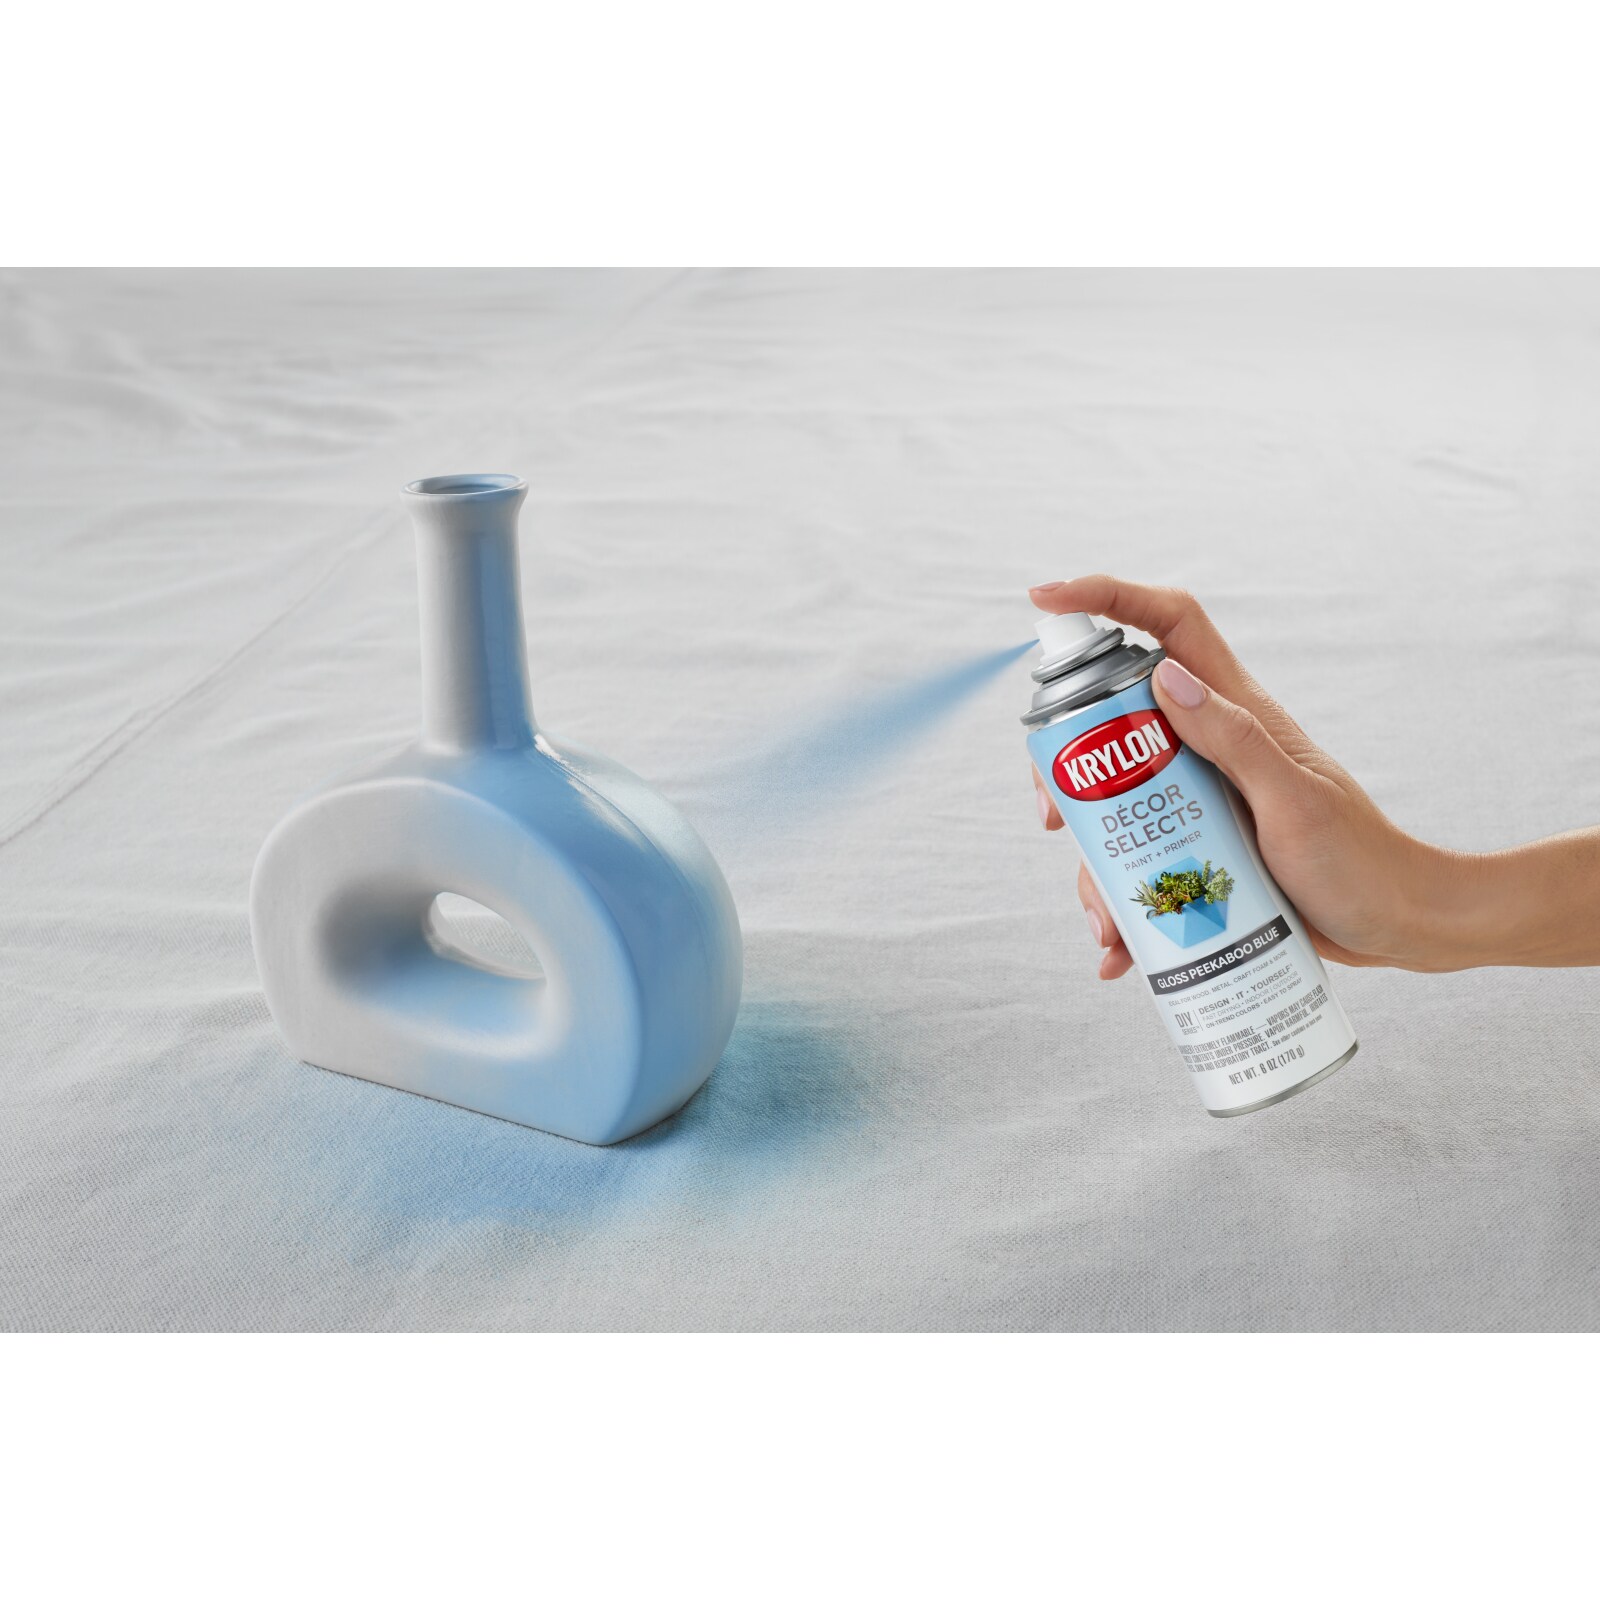 Krylon Decor Selects Gloss White Spray Paint and Primer In One